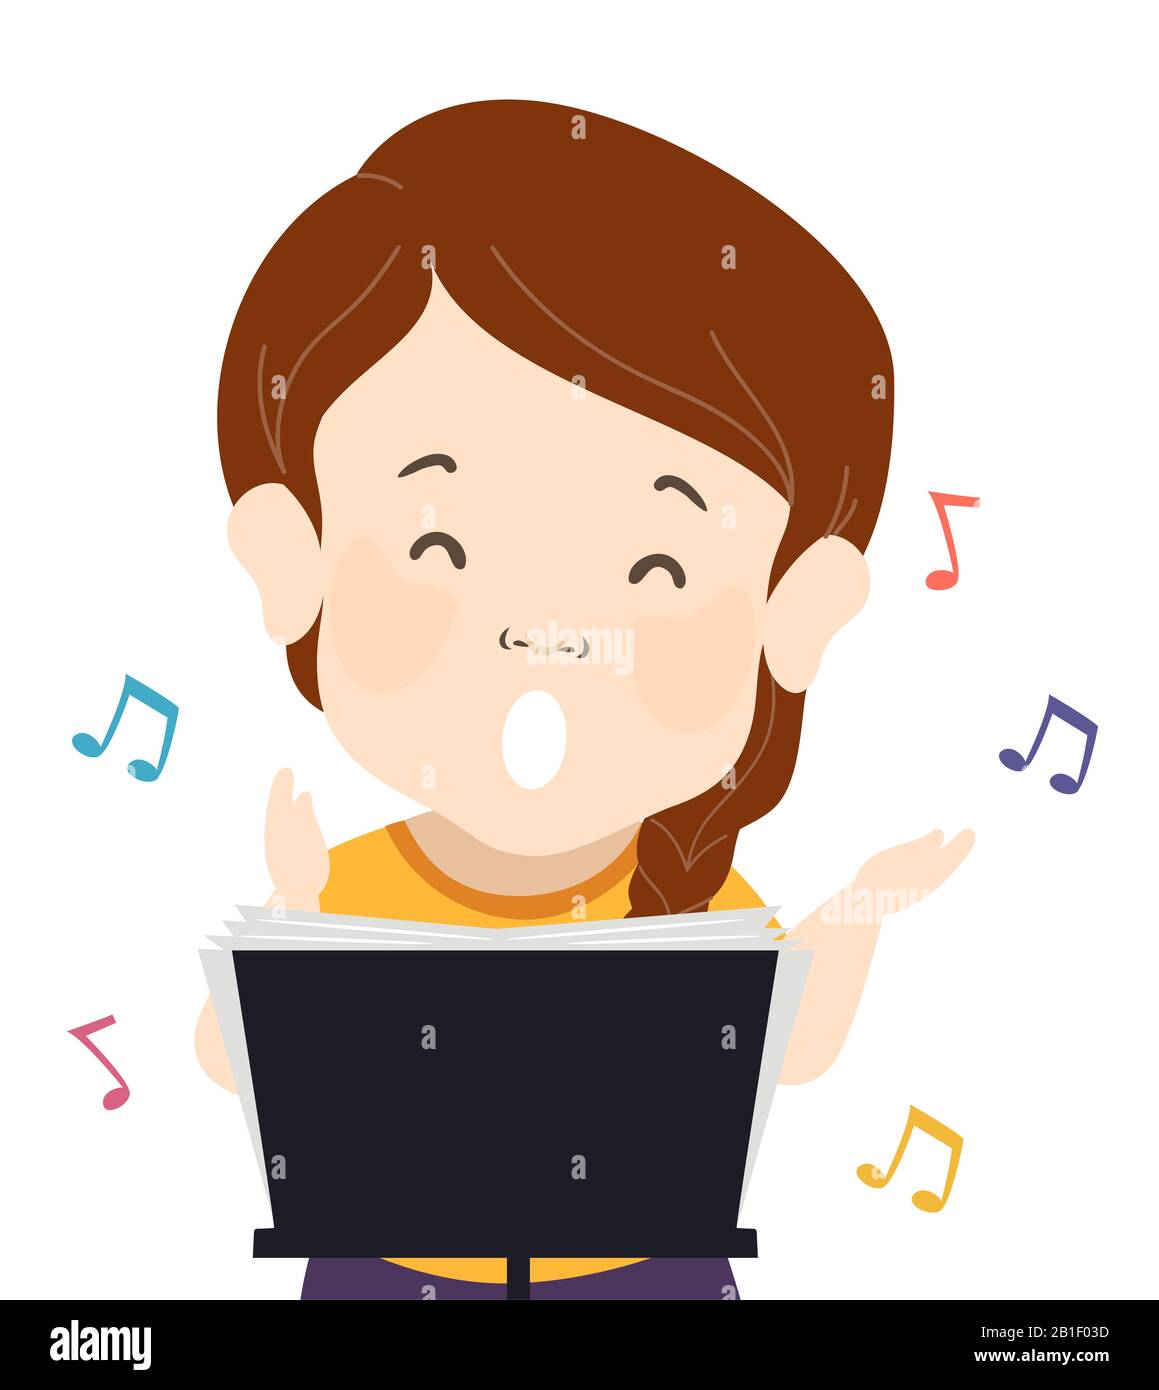 Illustration of a Girl with Dwarfism Singing and Using Music Rack or Stand with Lyrics Stock Photo